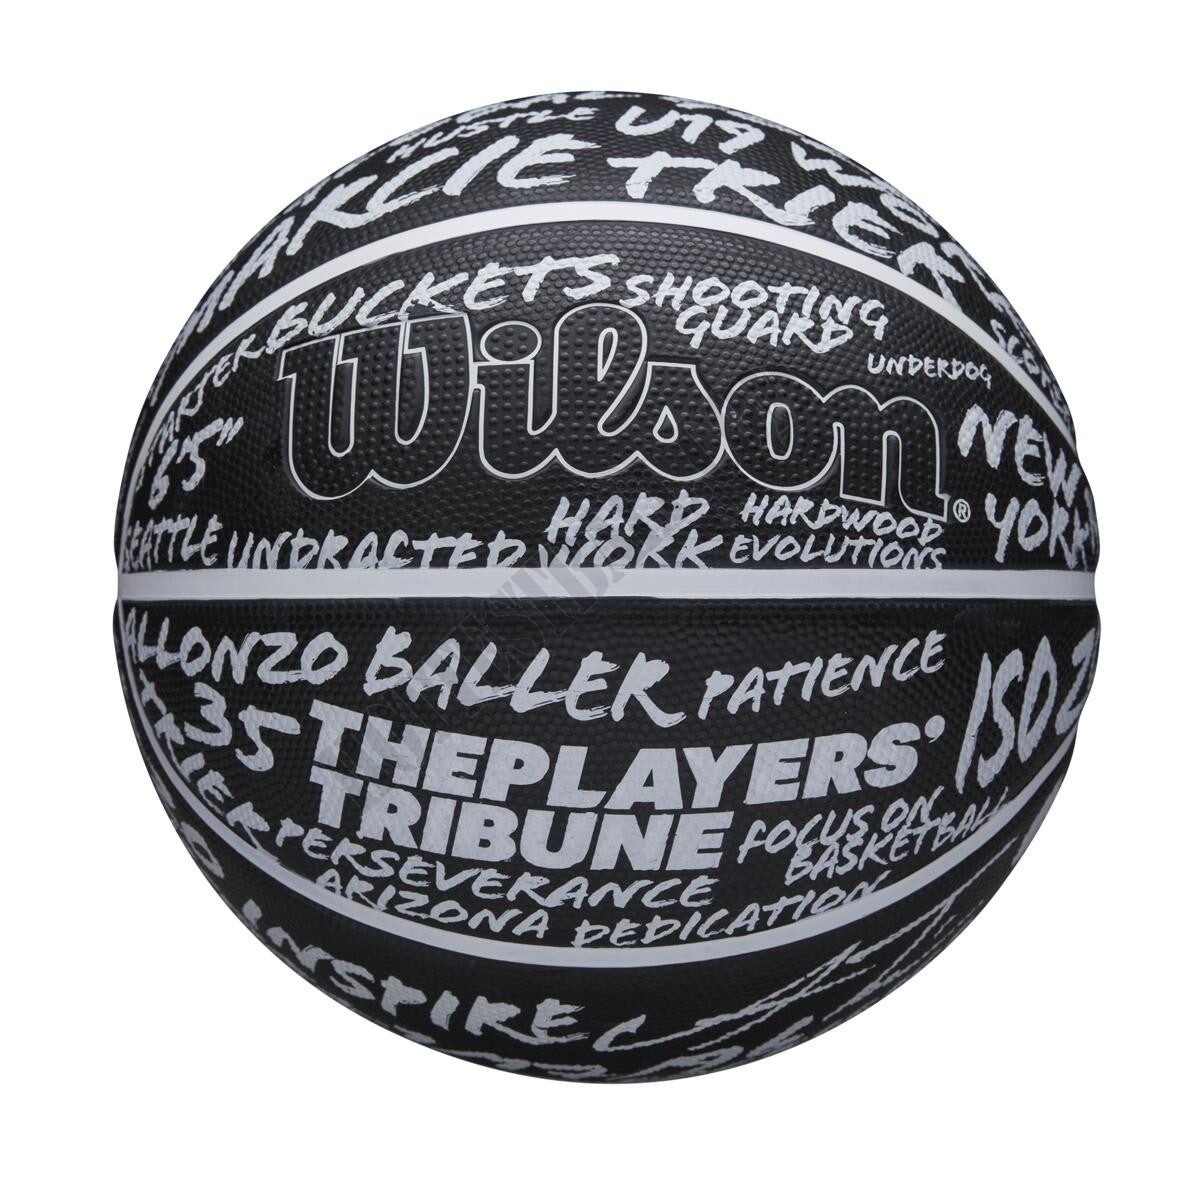 ISO Zo x The Players' Tribune Limited Edition Basketball - Wilson Discount Store - -0